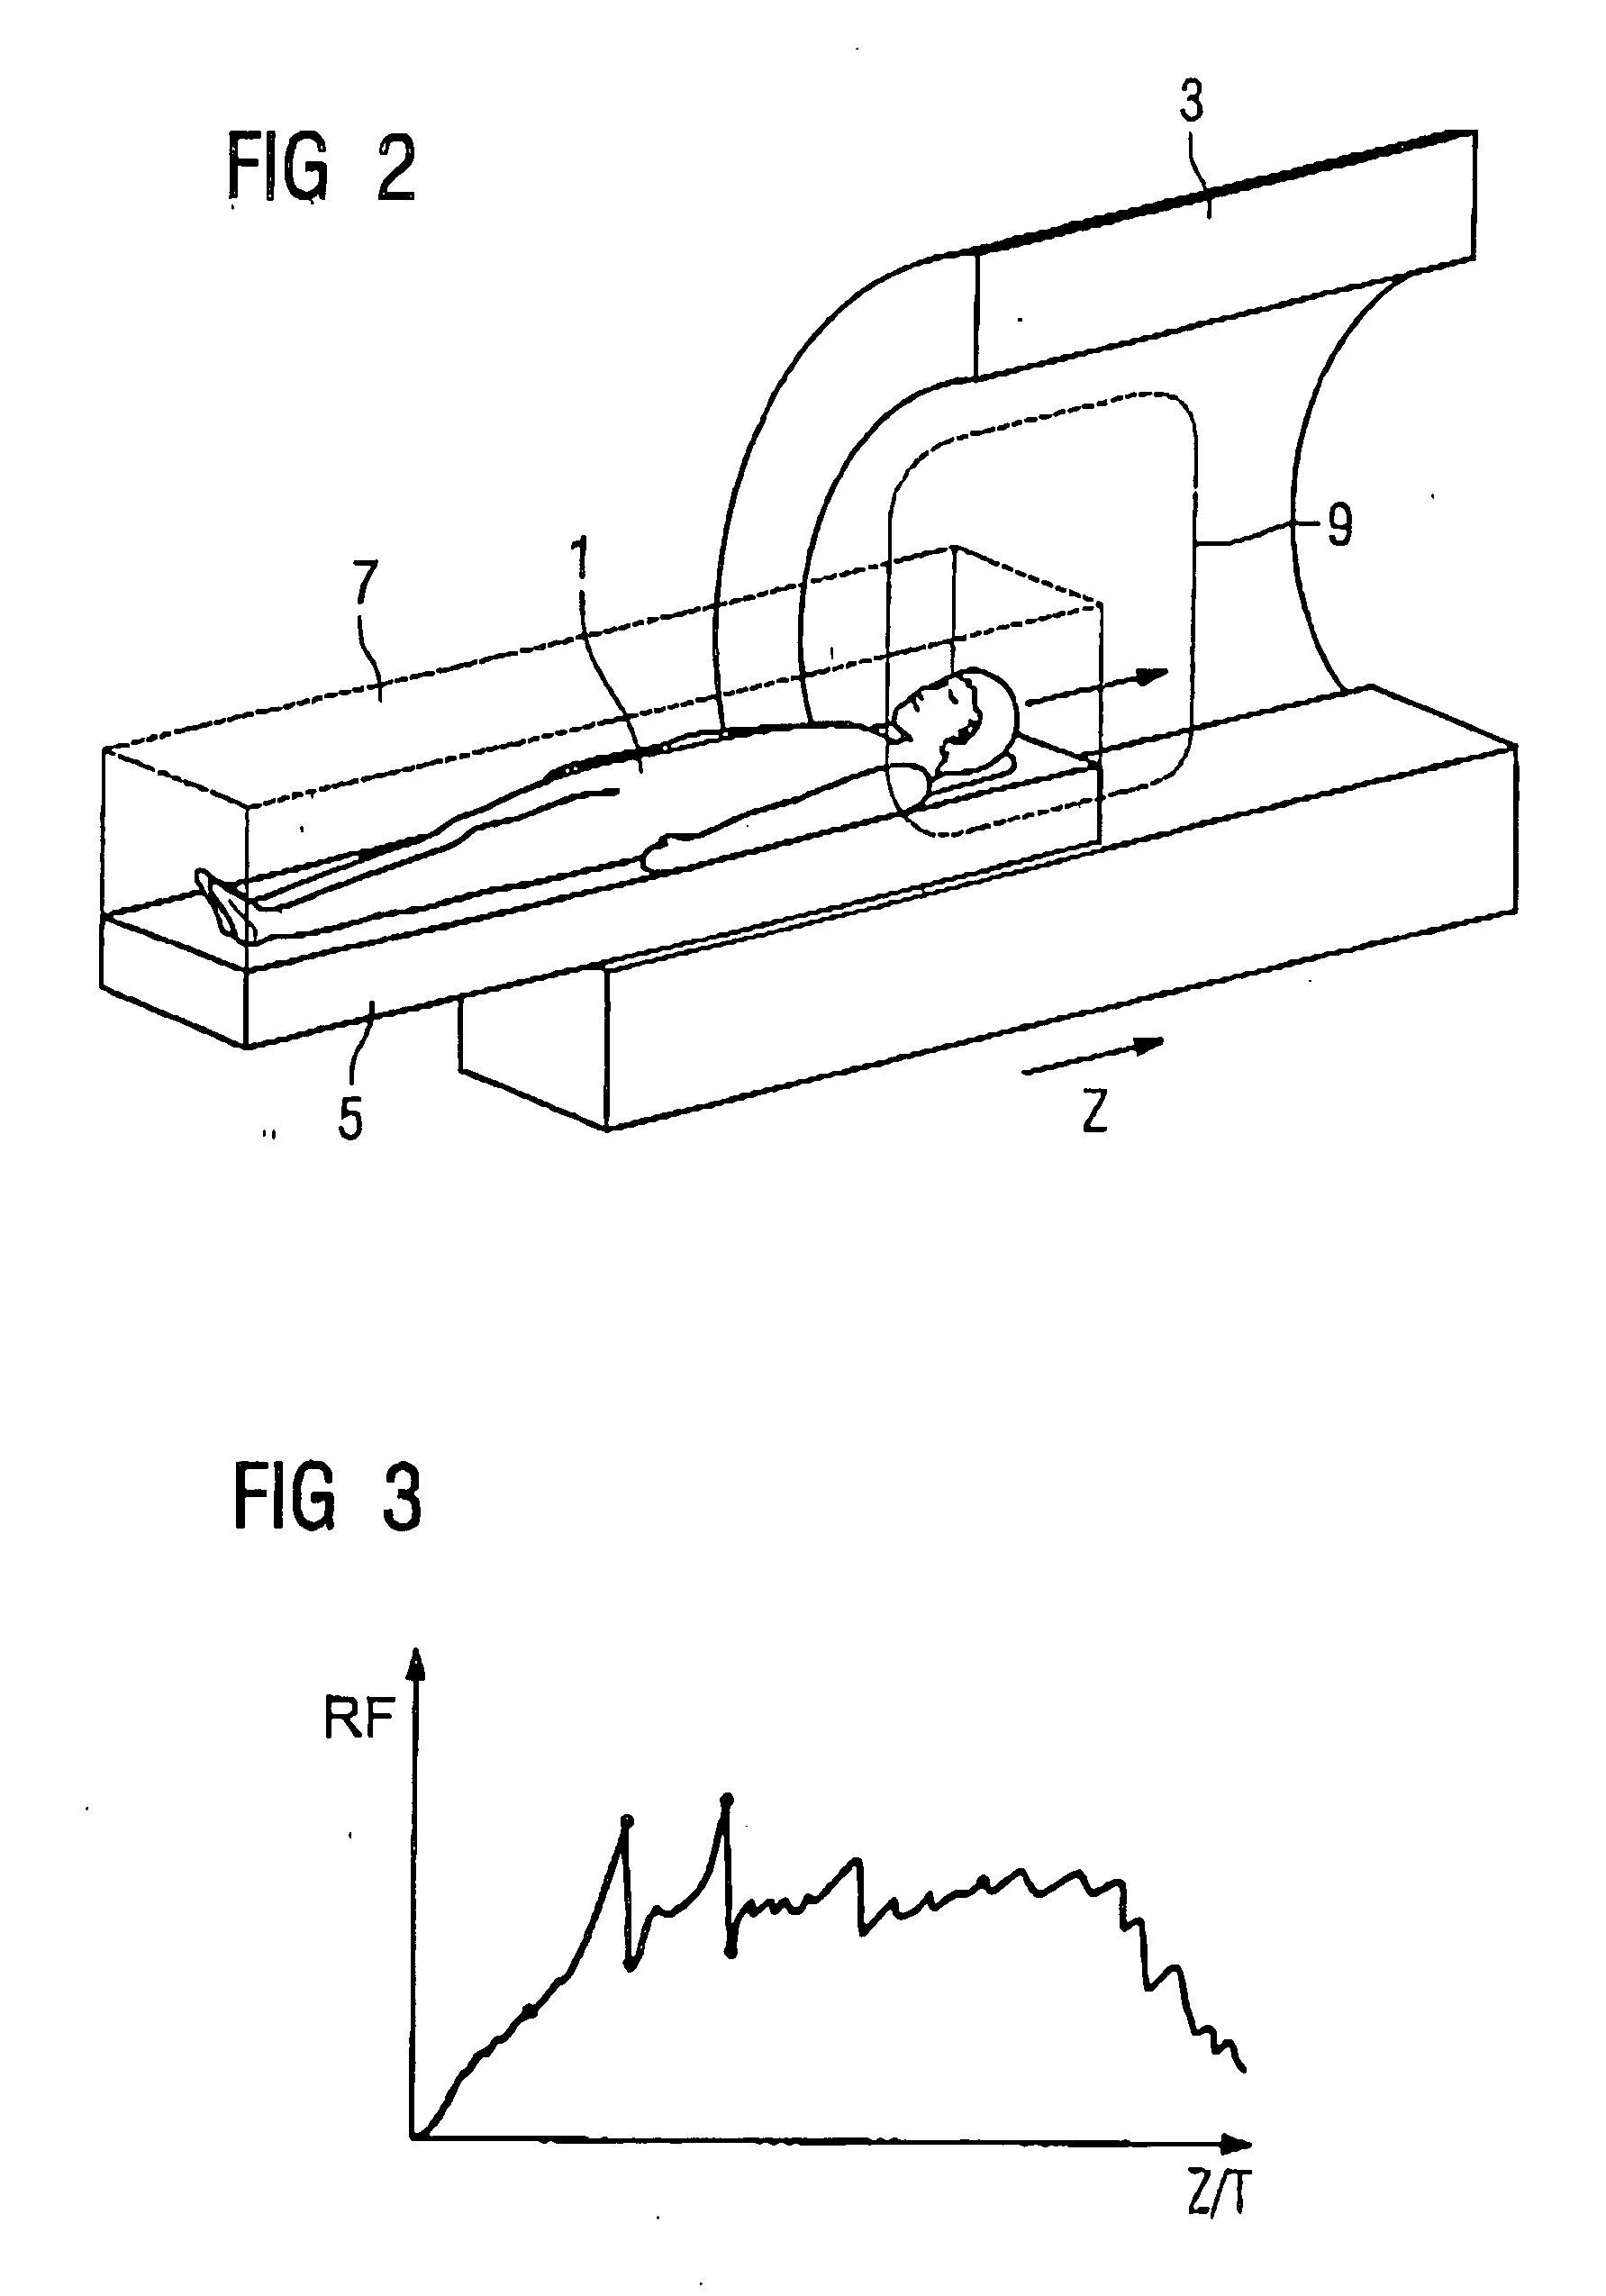 Method for implementation of a magnetic resonance examination of a patient